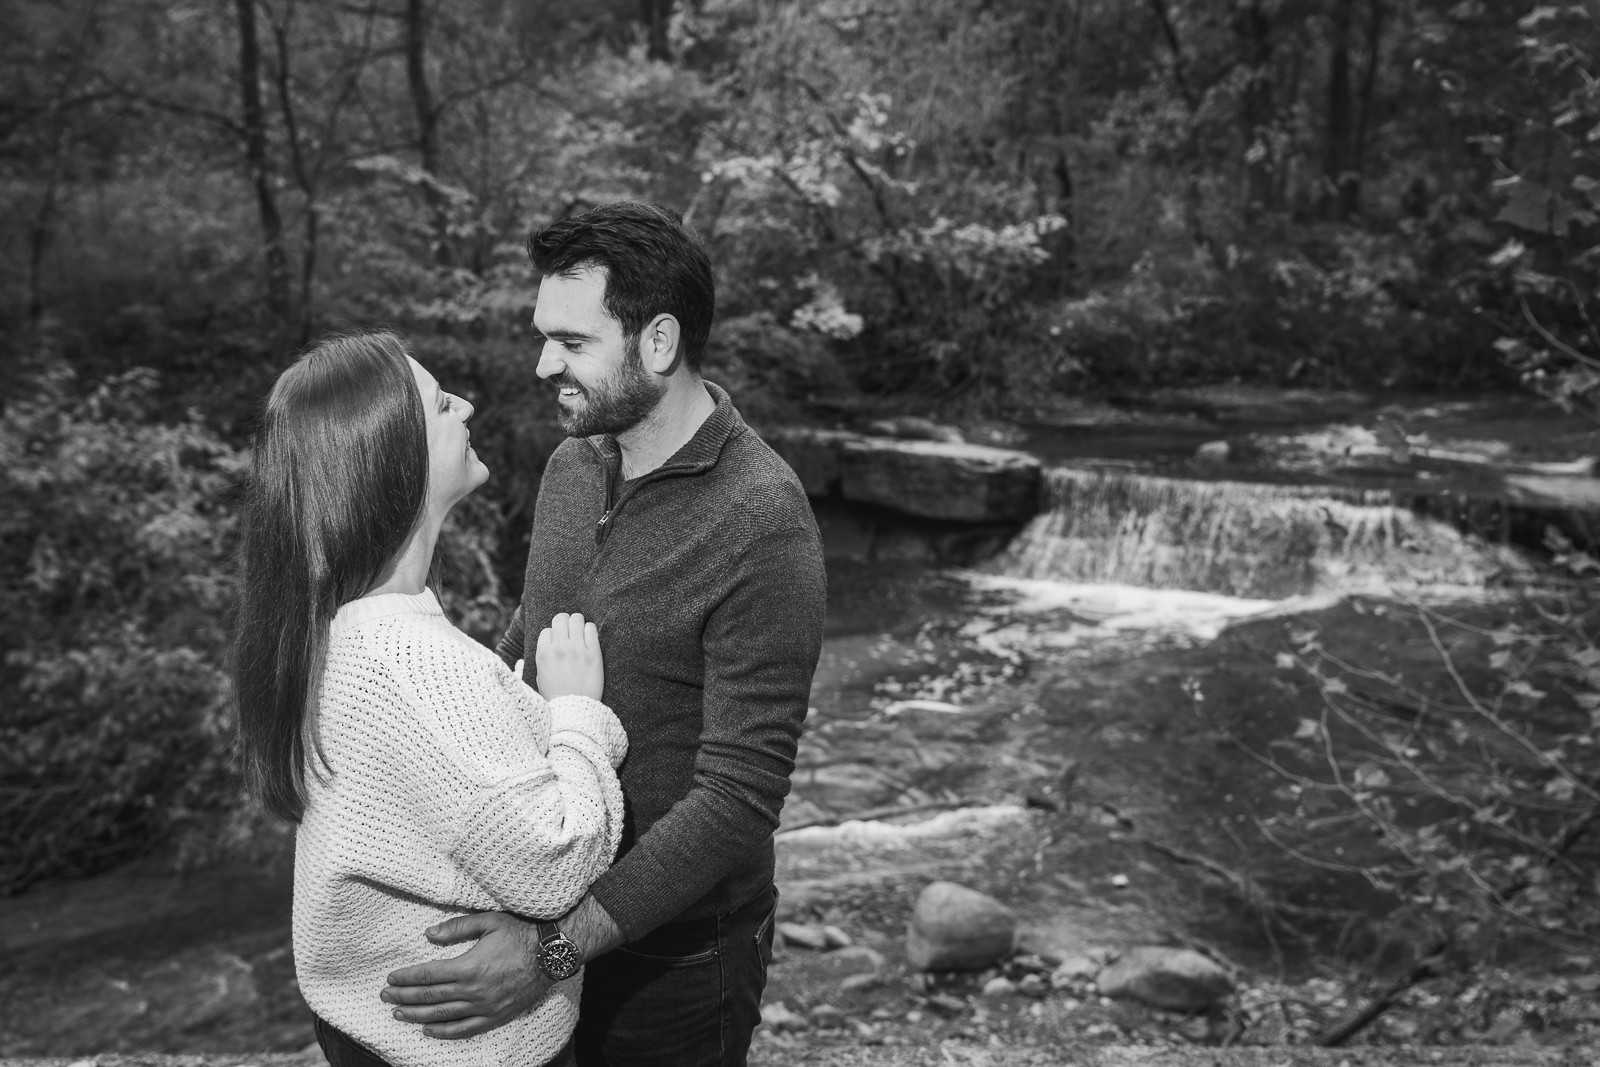 Man and woman fiancee engagement photo, outdoor, nature, forest, creek, waterfall, outdoor fall engagement photo session at Tinkers Creek, Bedford Reservation, Cleveland Metroparks